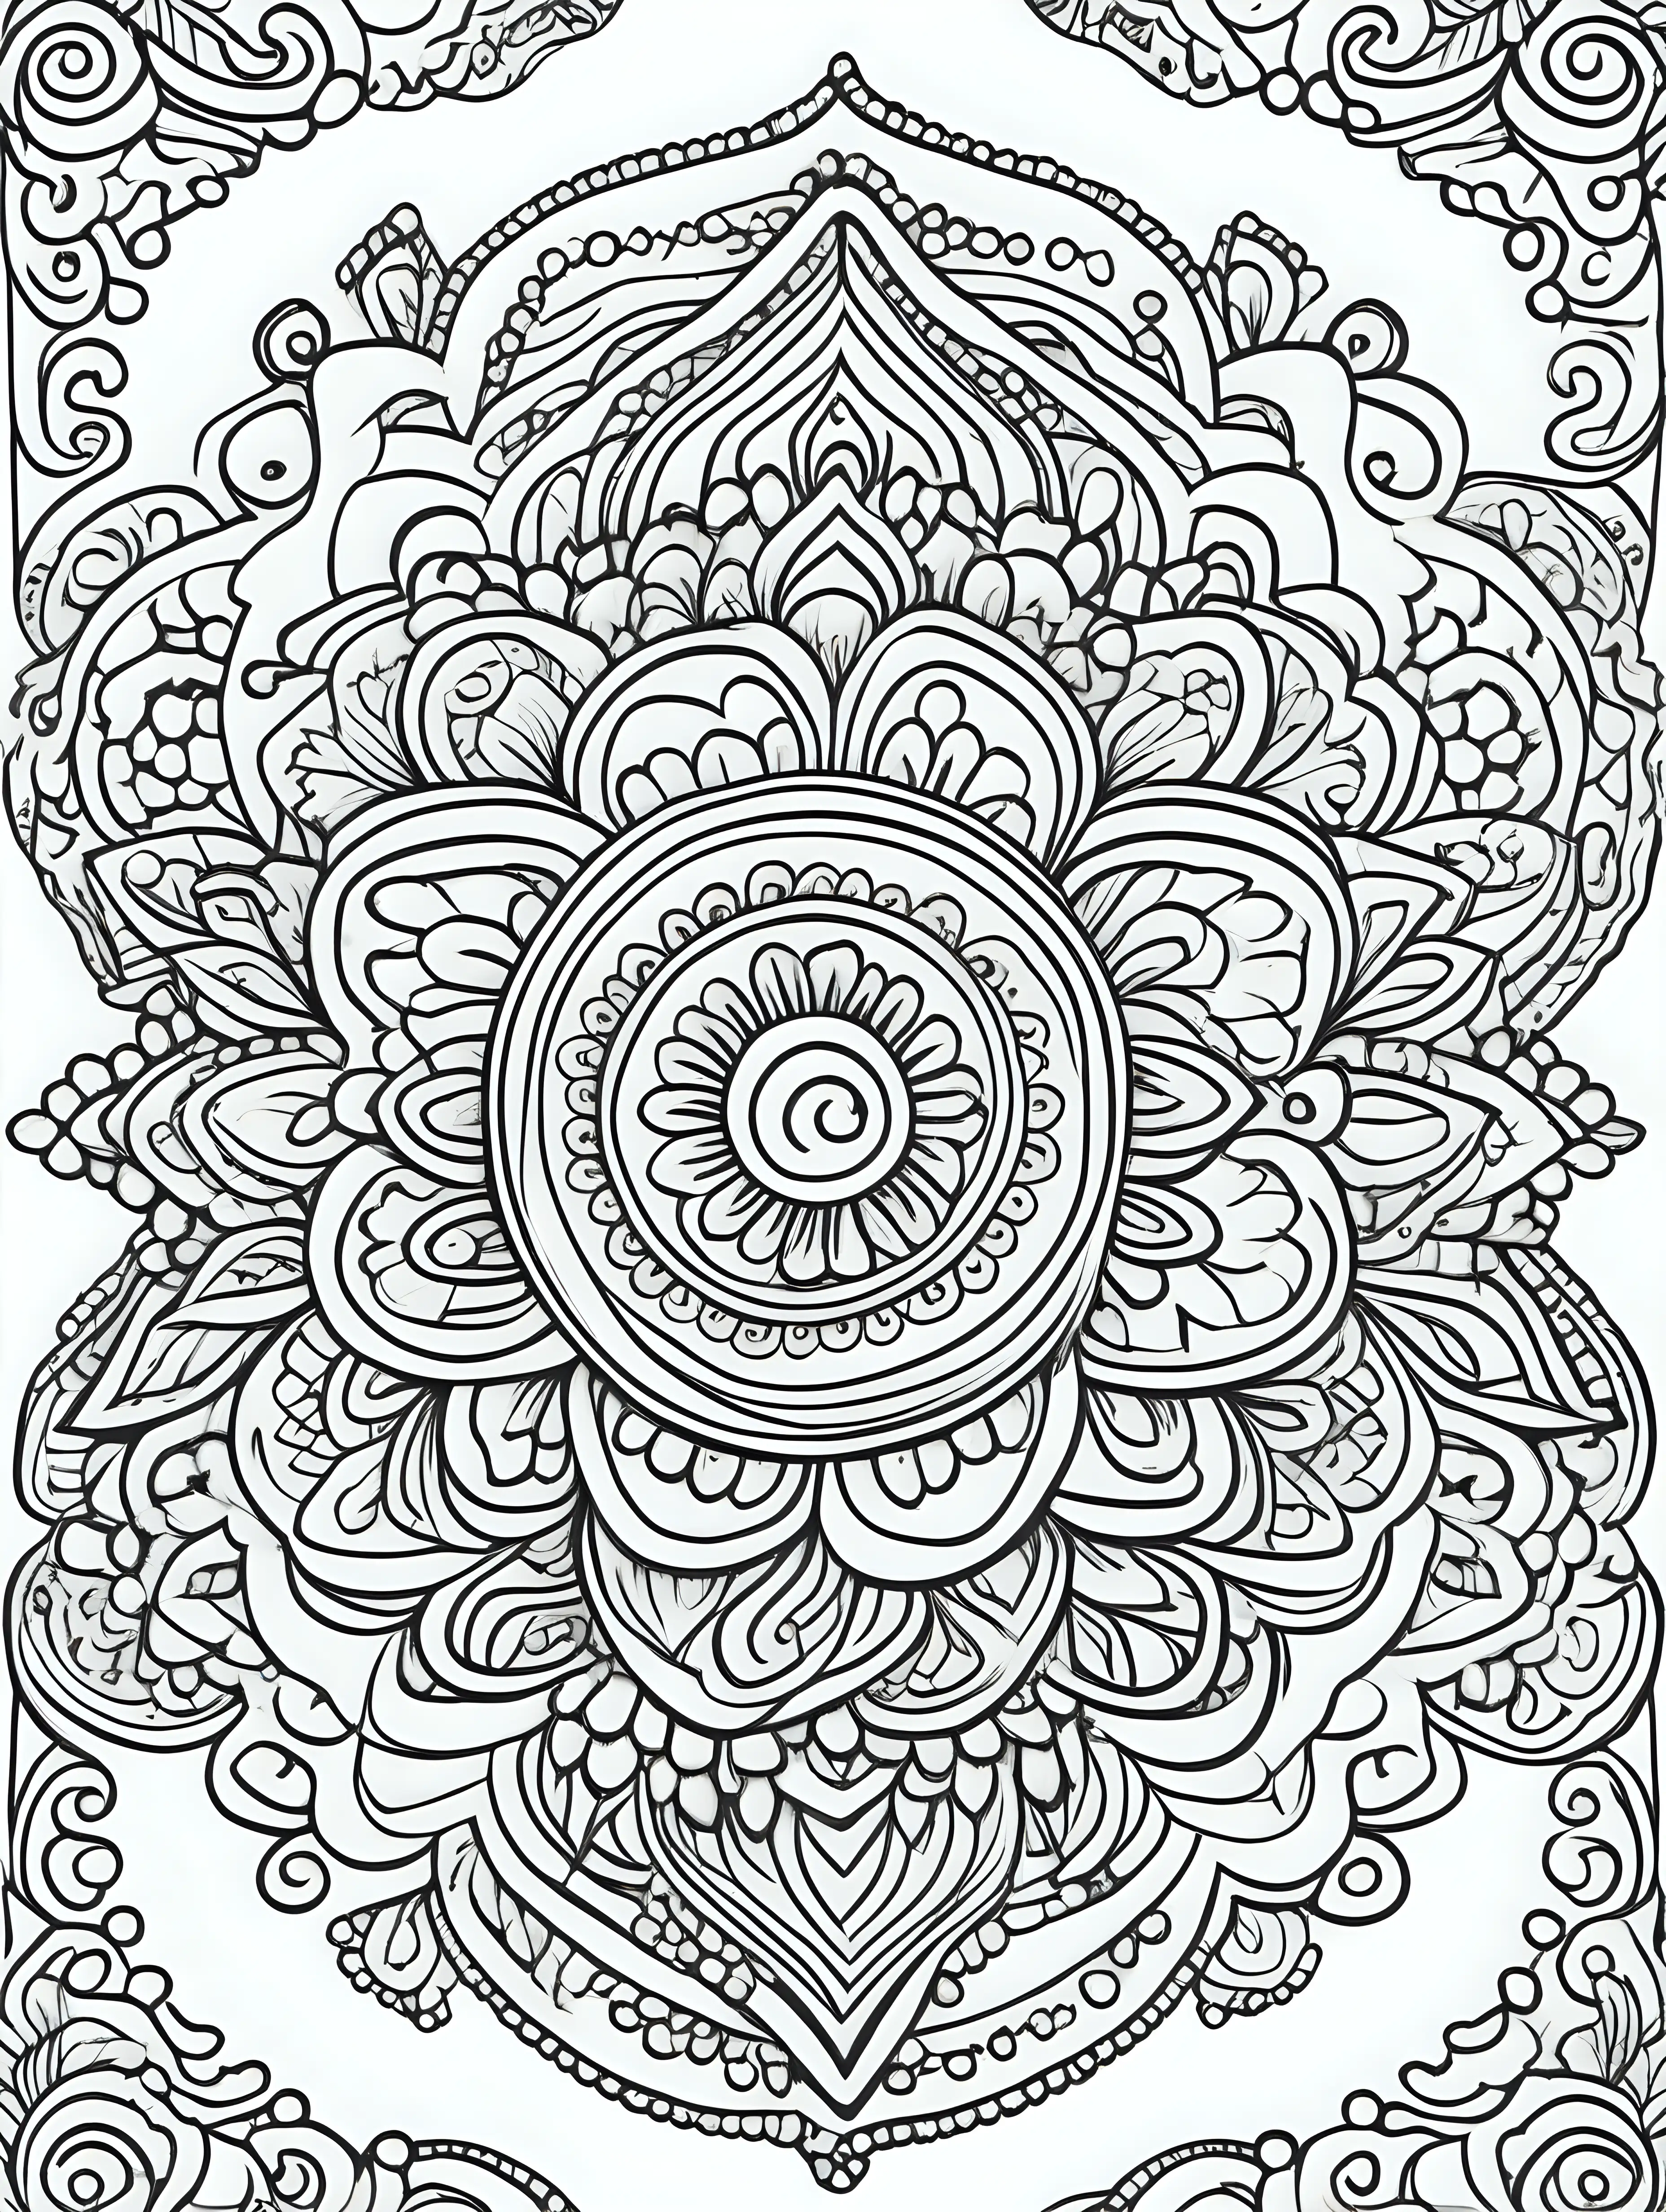 Intricate Henna Patterns Coloring Page with Thick Lines